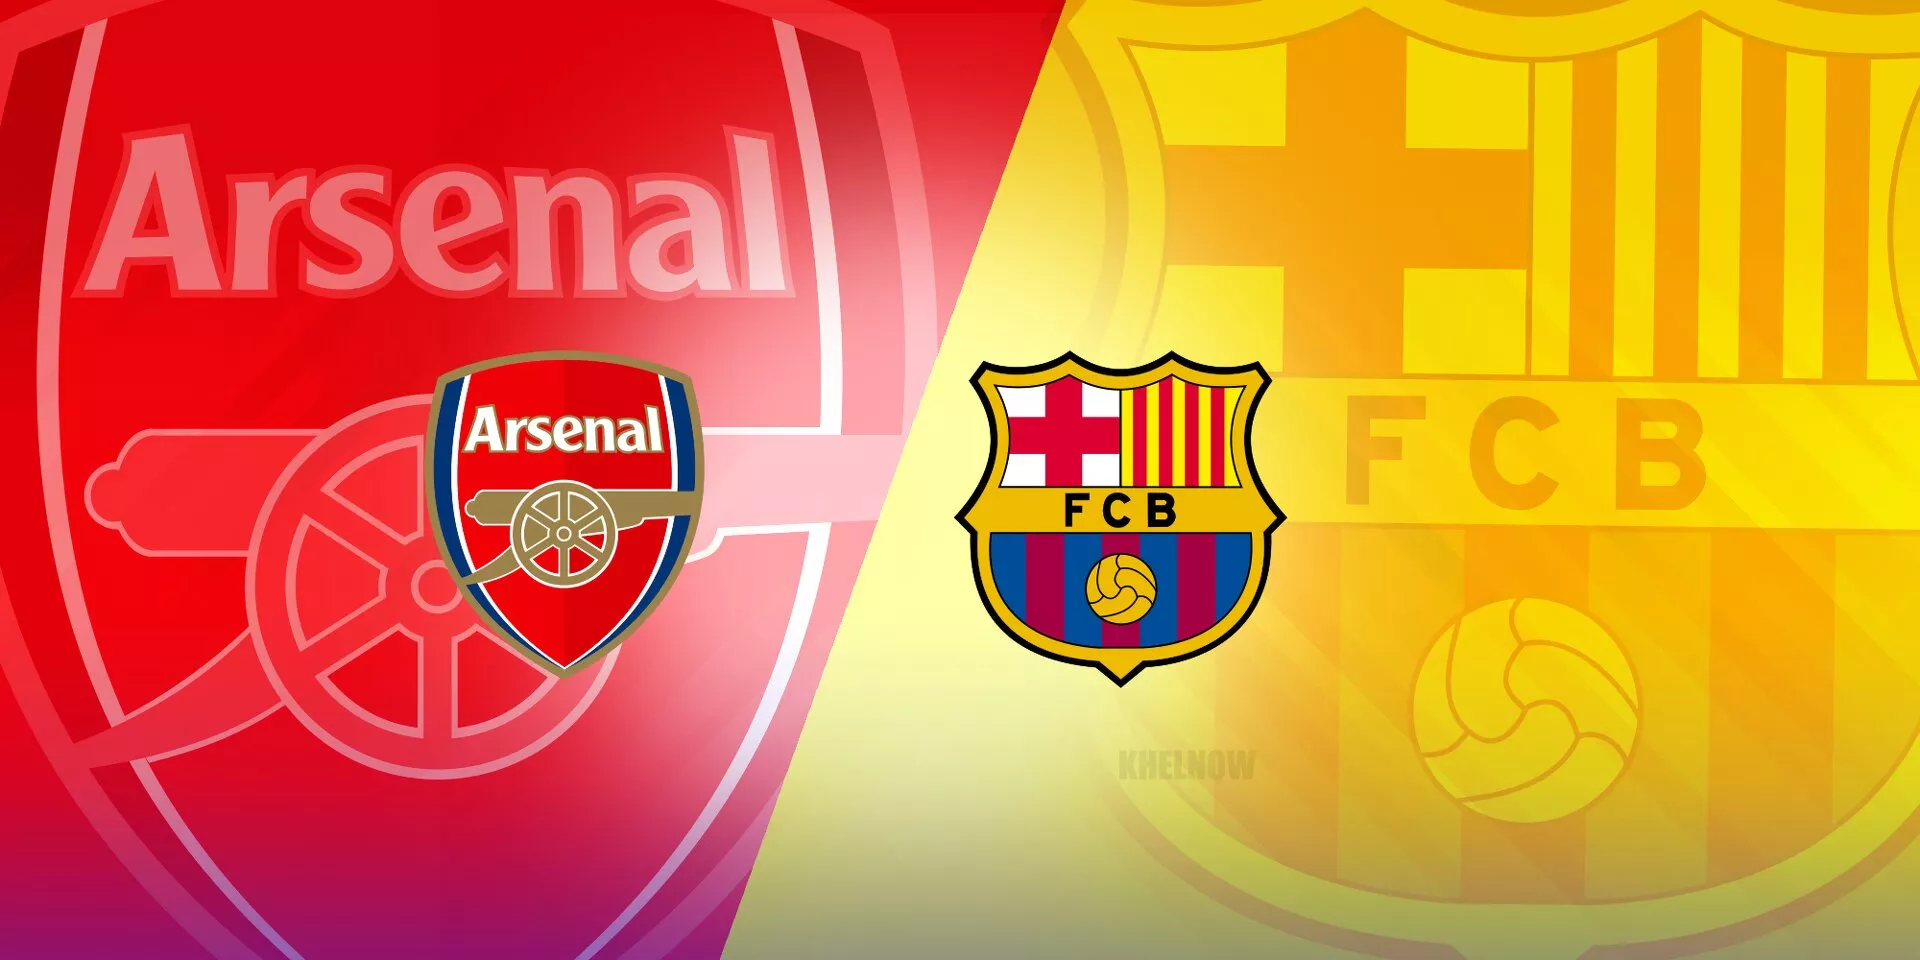 Arsenal vs Barcelona Where and how to watch?